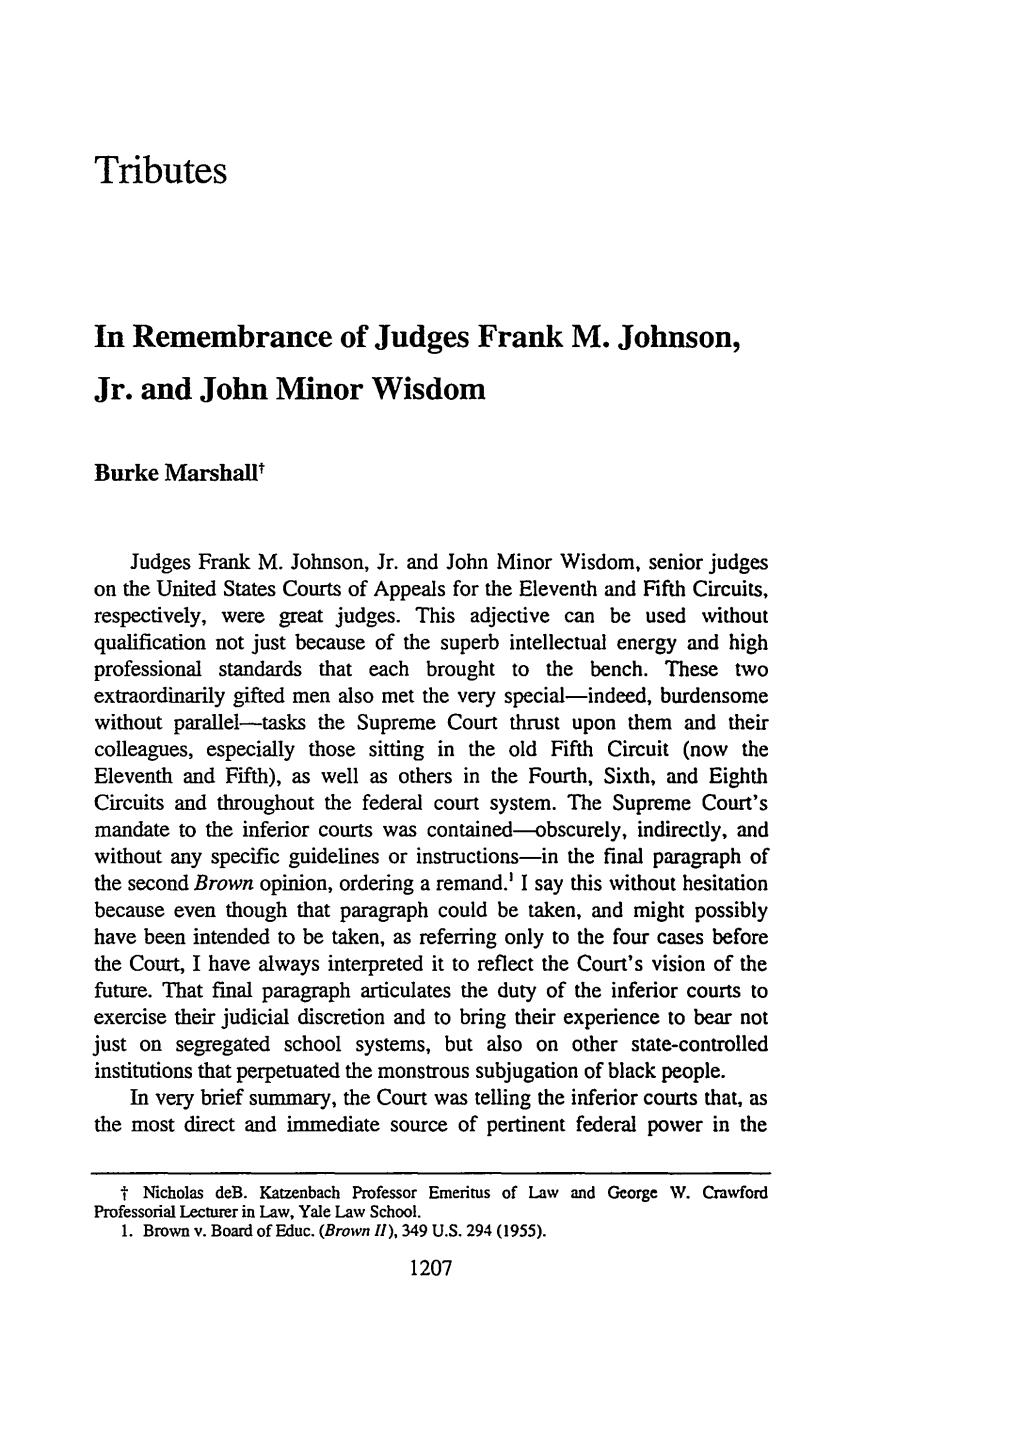 In Remembrance of Judges Frank M. Johnson, Jr.And John Minor Wisdom